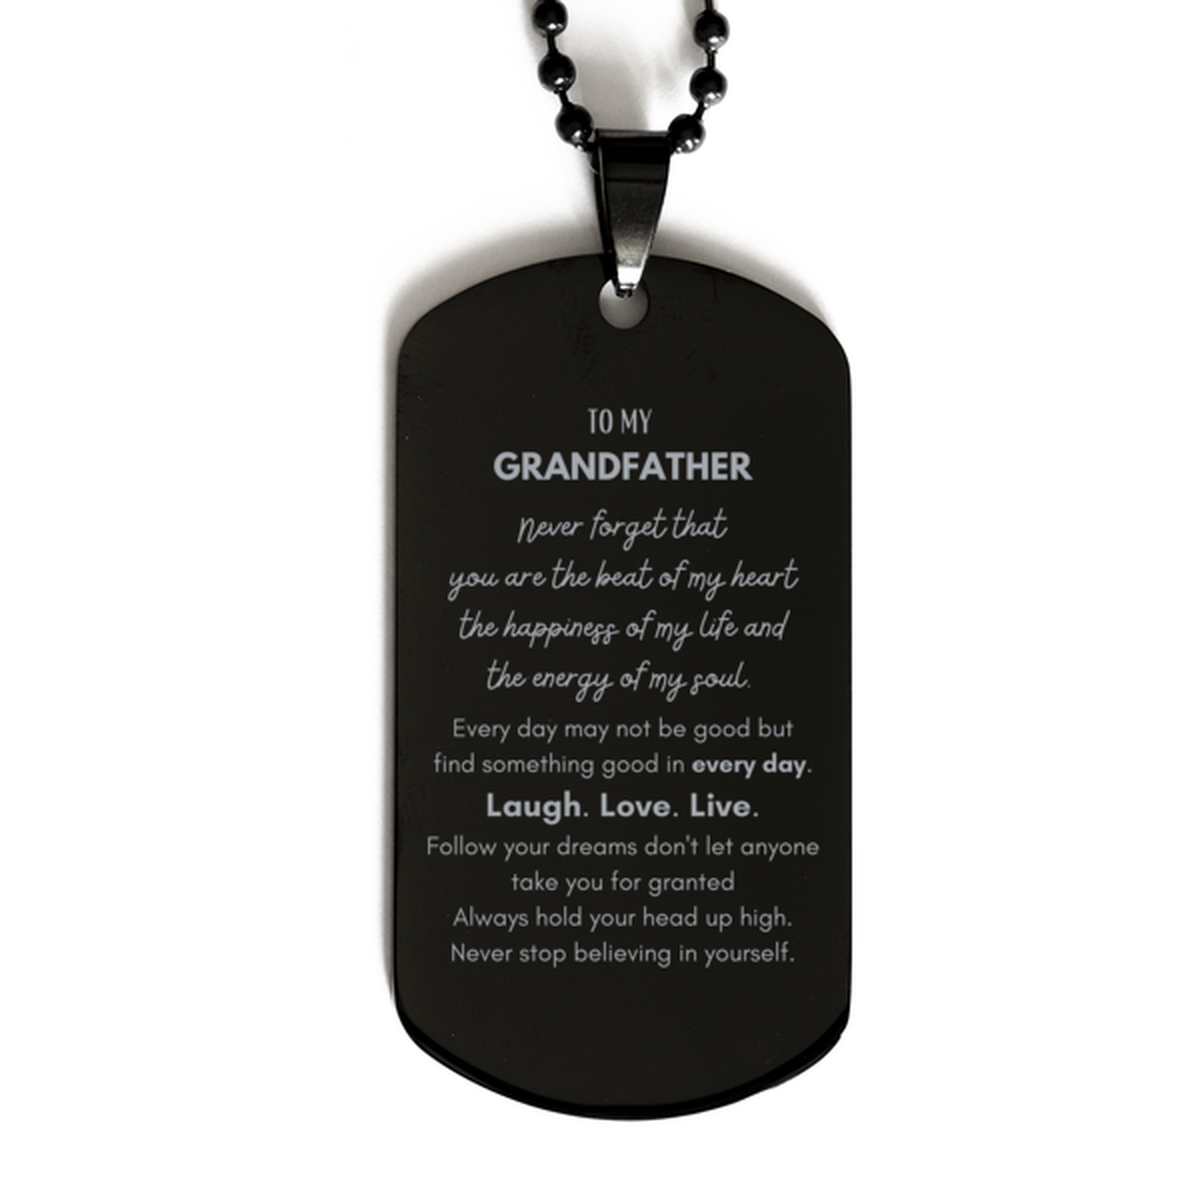 To My Grandfather Dogtag Gifts, Christmas Grandfather Black Dog Tag Present, Birthday Unique Motivational For Grandfather, To My Grandfather Never forget that you are the beat of my heart the happiness of my life and the energy of my soul